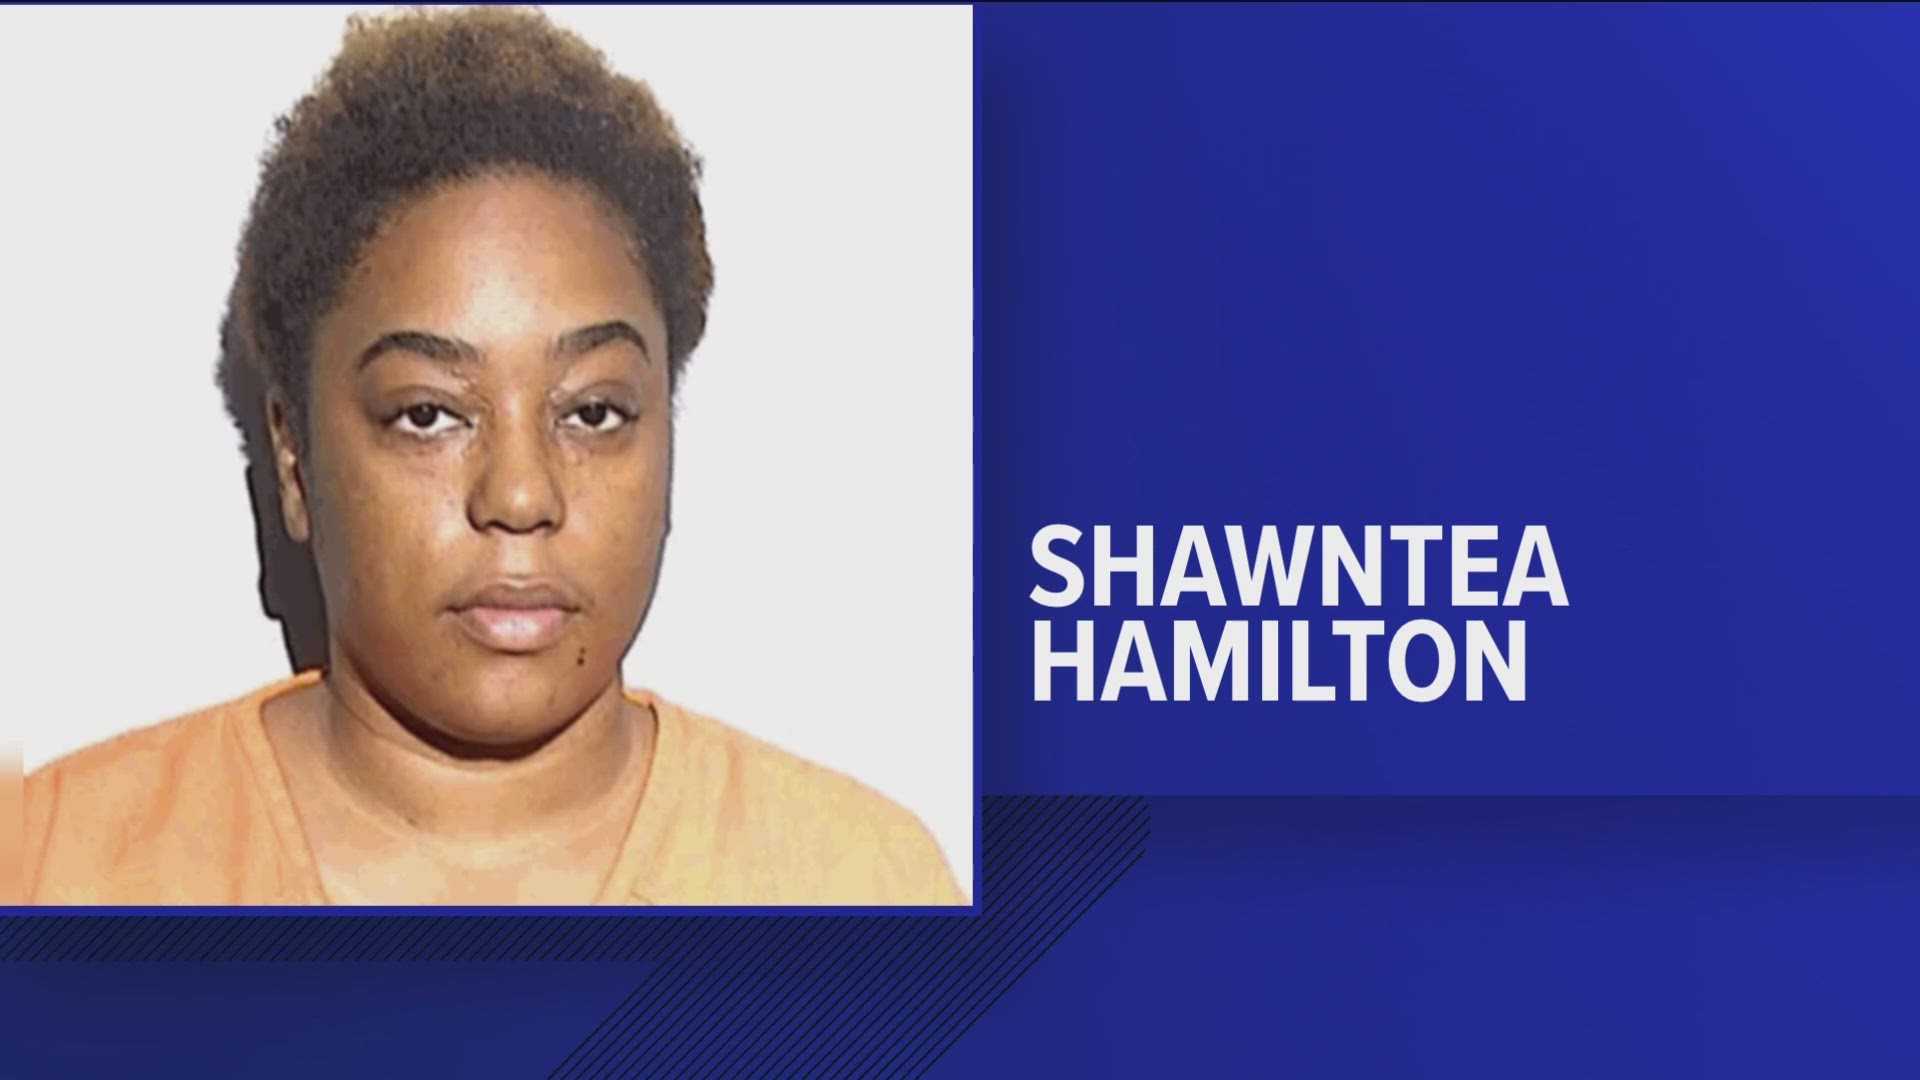 Shawntea Hamilton was arrested by the U.S. Marshals Northern Ohio Violent Fugitive Task Force Tuesday.